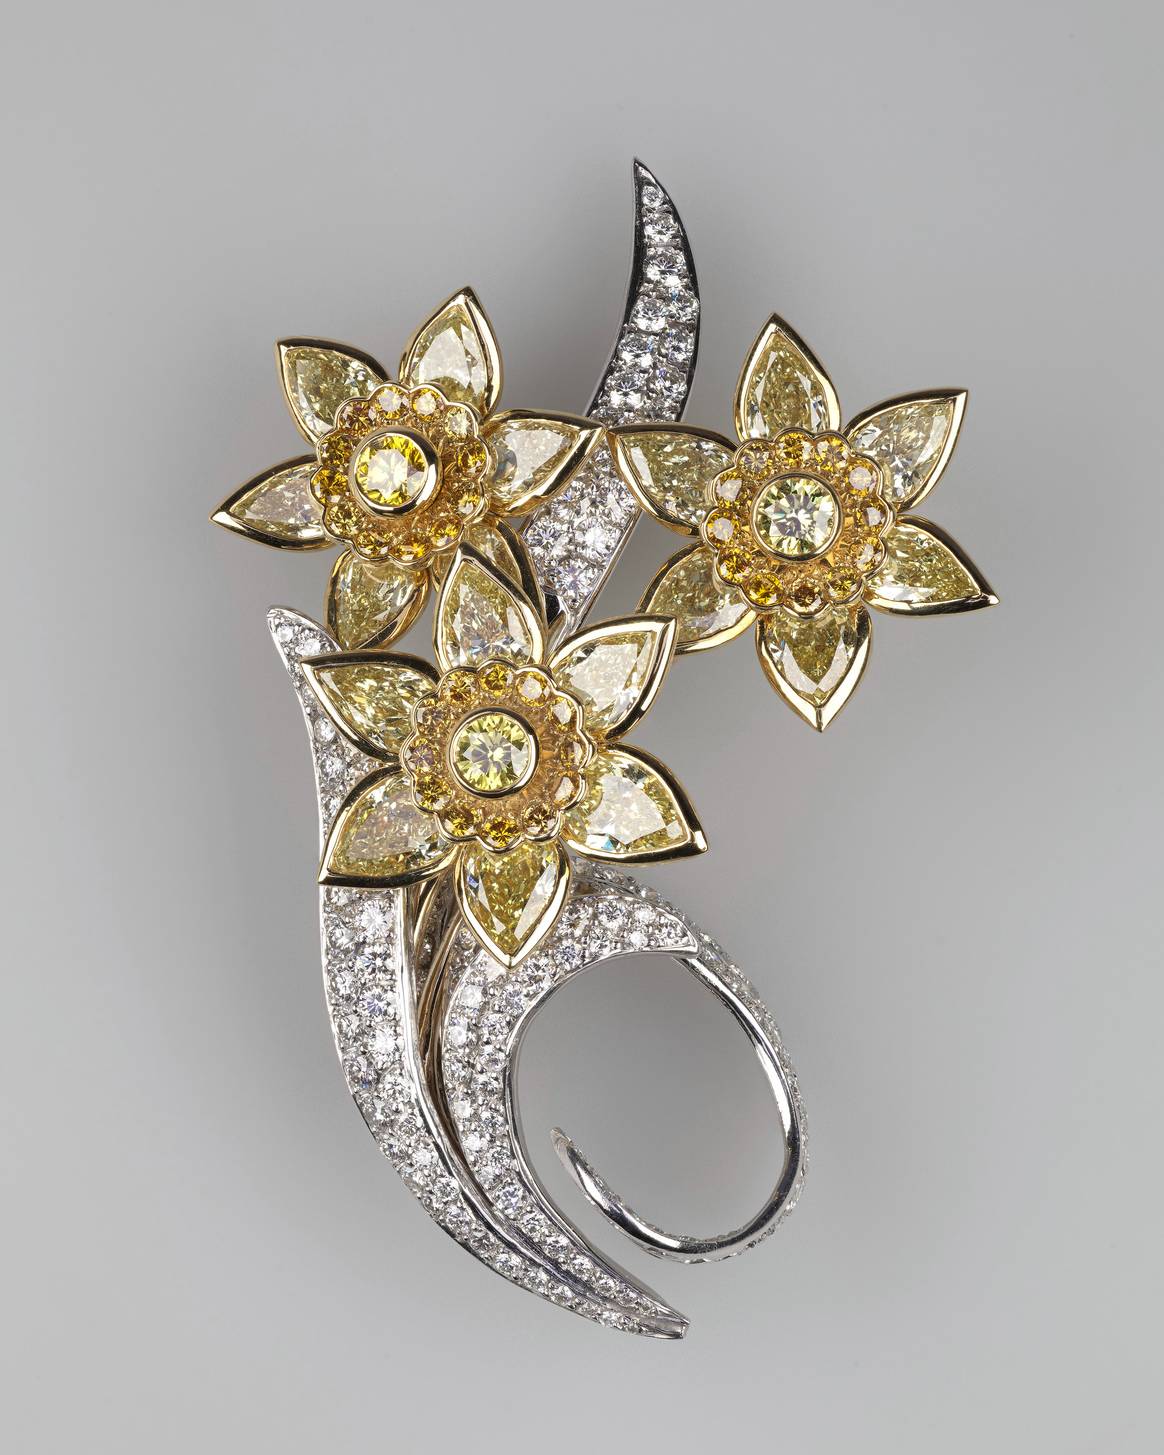 Image: Royal Collection Trust; The Queen’s Daffodil  of Wales Brooch